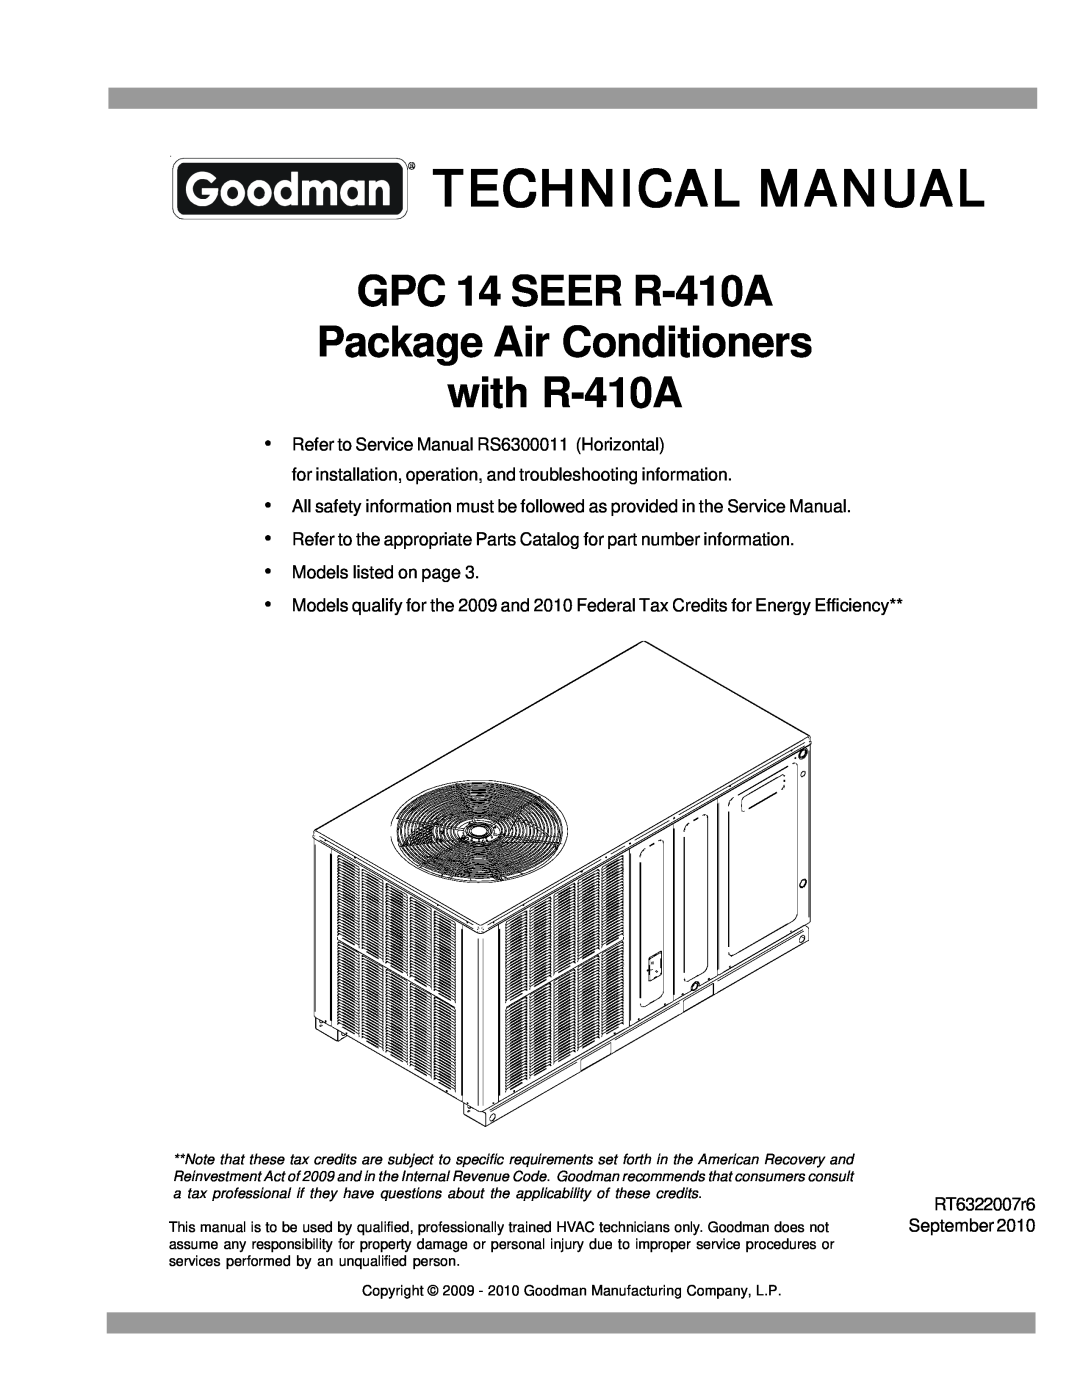 Goodman Mfg GPC 14 SEER R-410 Package Air Conditioners with R-410A, RS6300011 service manual Technical Manual 